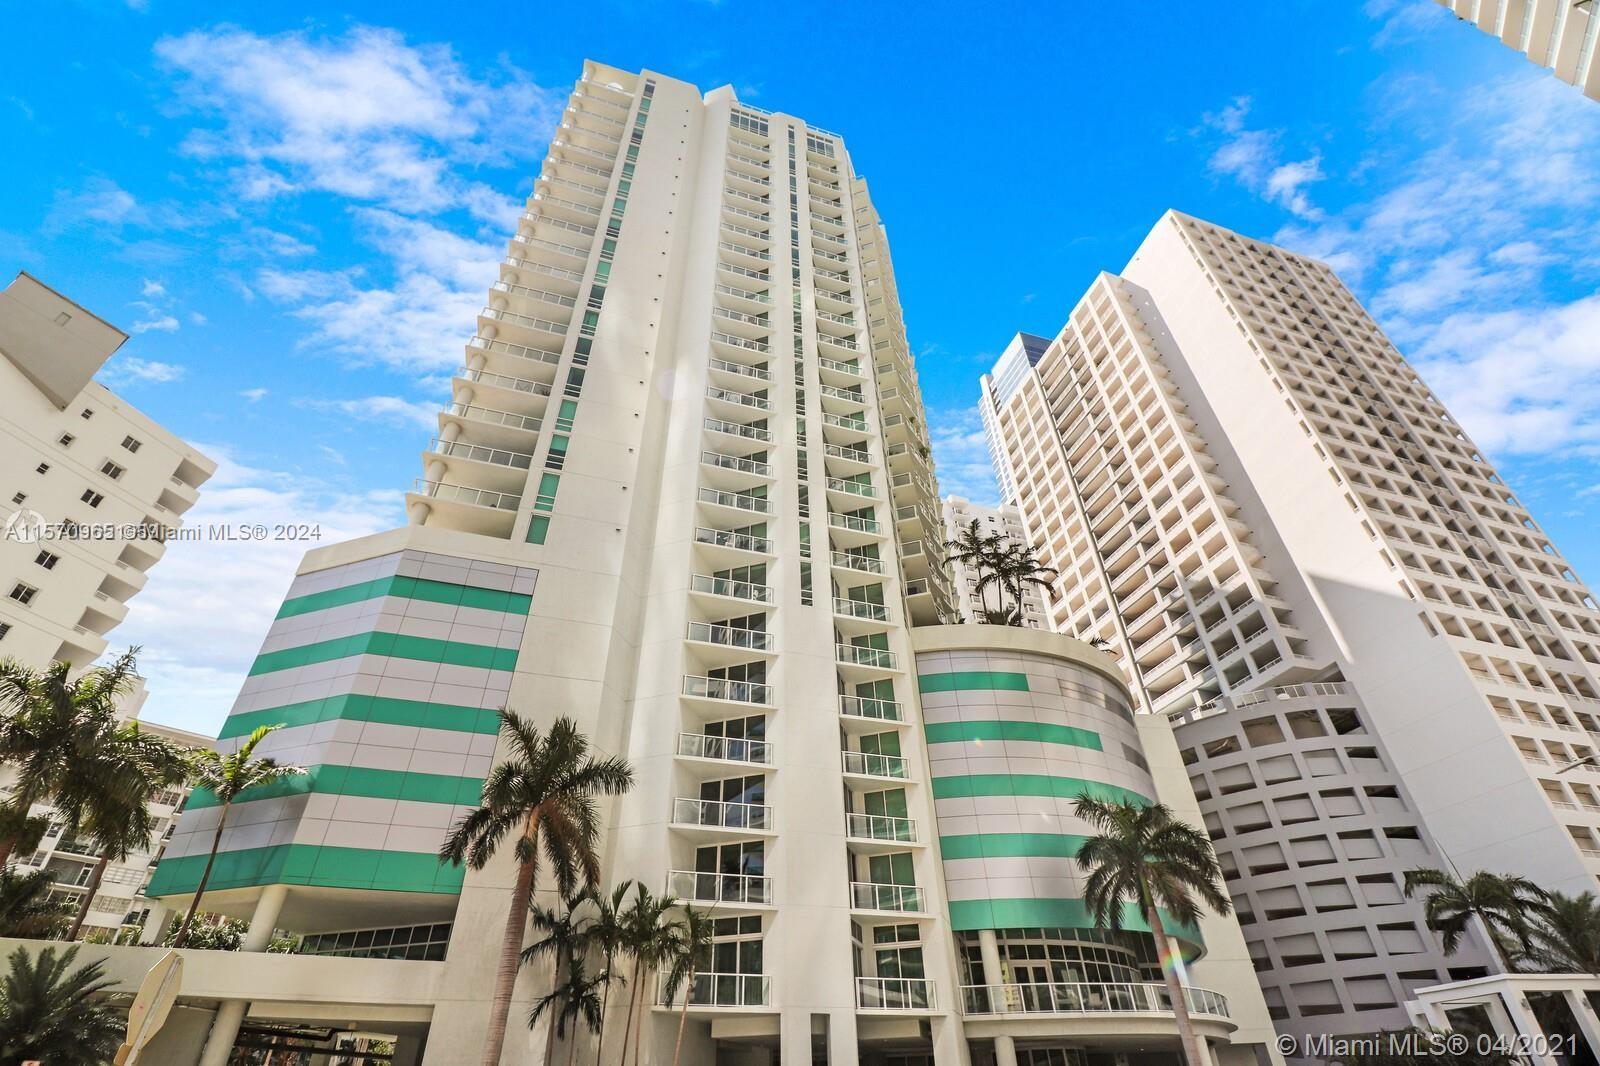 EXQUISITE CONDO IN THE HEART OF BRICKELL WITH EXTRAORDINARY VIEWS OF THE BAY AND CITY. THIS 2/2.5 OFFERS 1,298 SQFT OF SPACE WITH MARBLE FLOORS THROUGHOUT. 9FT CEILINGS, CHERRY WOOD KITCHENS, INFINITY EDGE BATHTUBS, GLASS SHOWERS, SPACIOUS PRIVATE BALCONY AND MORE. UPSCALE AMENITIES, SUCH AS, CLUB ROOM, ROOF TOP POOL & HOT TUB, ROOF TOP FITNESS CENTER, BUSINESS CENTER, 24 HOUR CONCIERGE AND VALET. SHORT WALK TO SHOPS AND RESTUARANTS, BRICKELL CITY CENTRE, MARY BRICKELL VILLAGE, MINUTES FROM BEACH AND MIAMI INTERNATIONAL AIRPORT. SEE BROKER REMARKS.